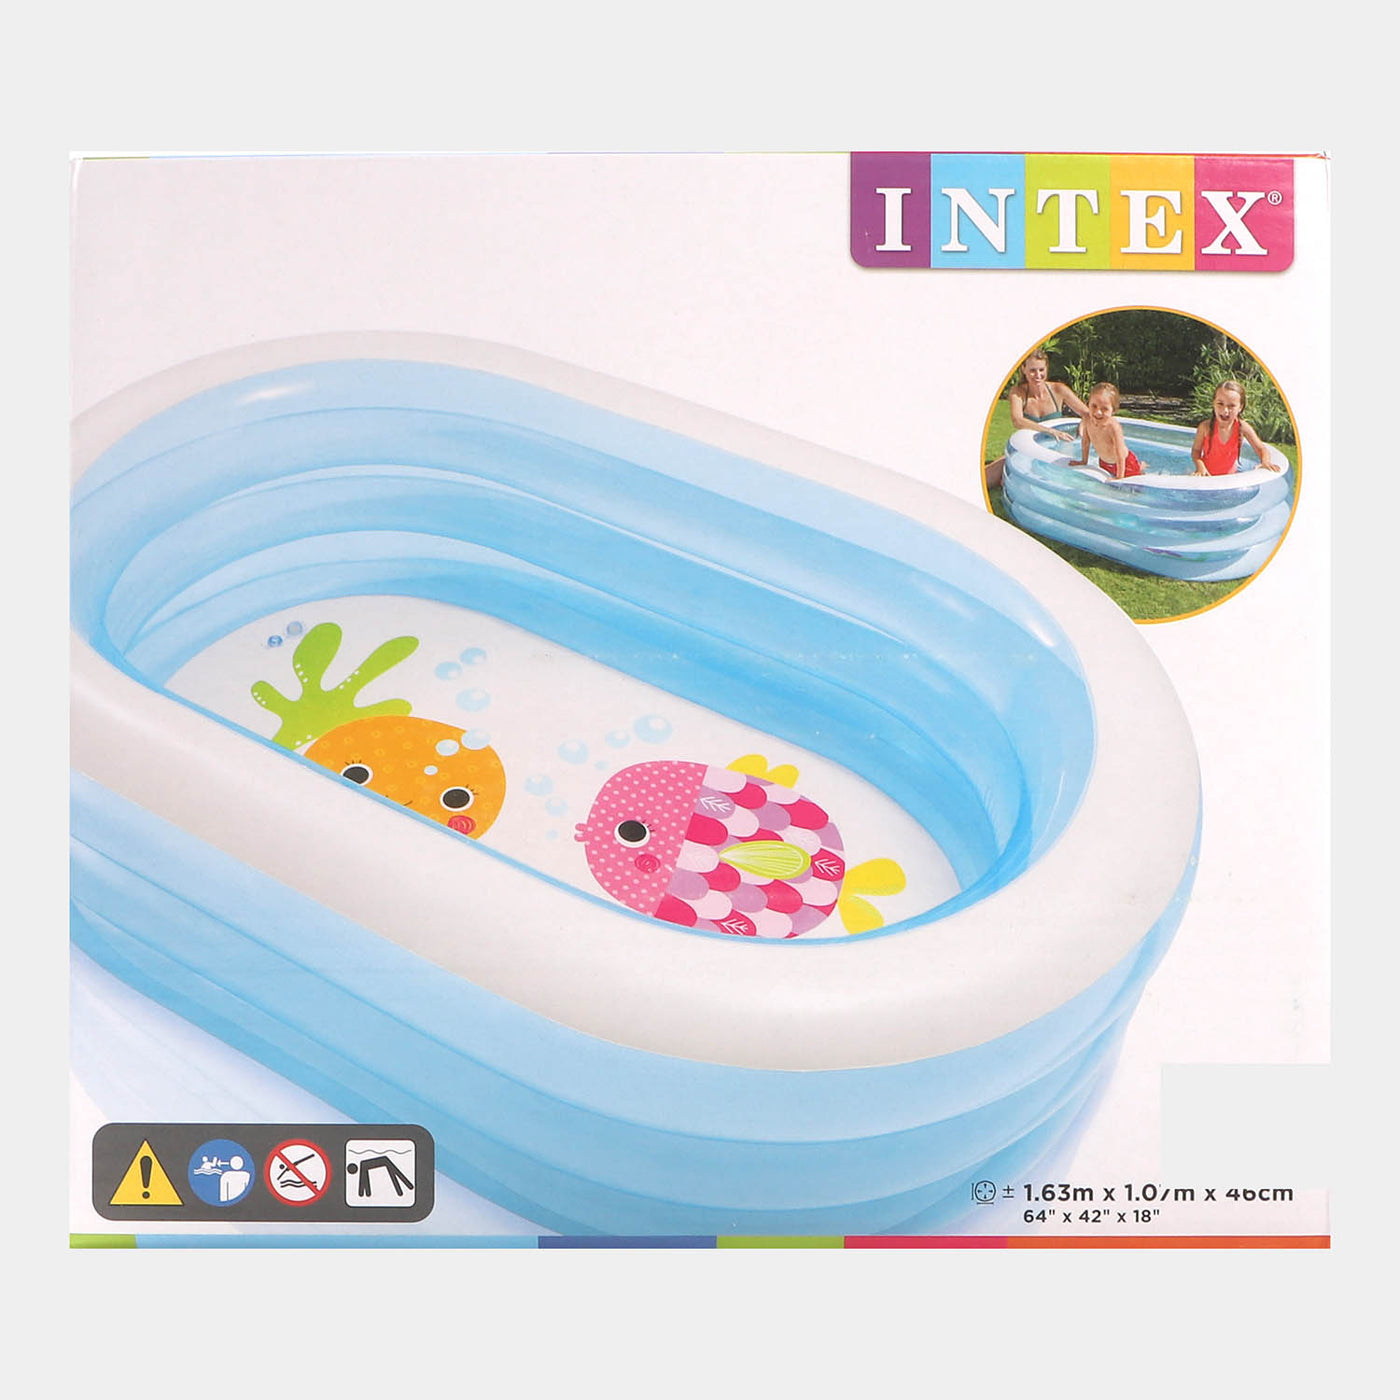 Intex Ahoy Pirate Friends Pool For Kids